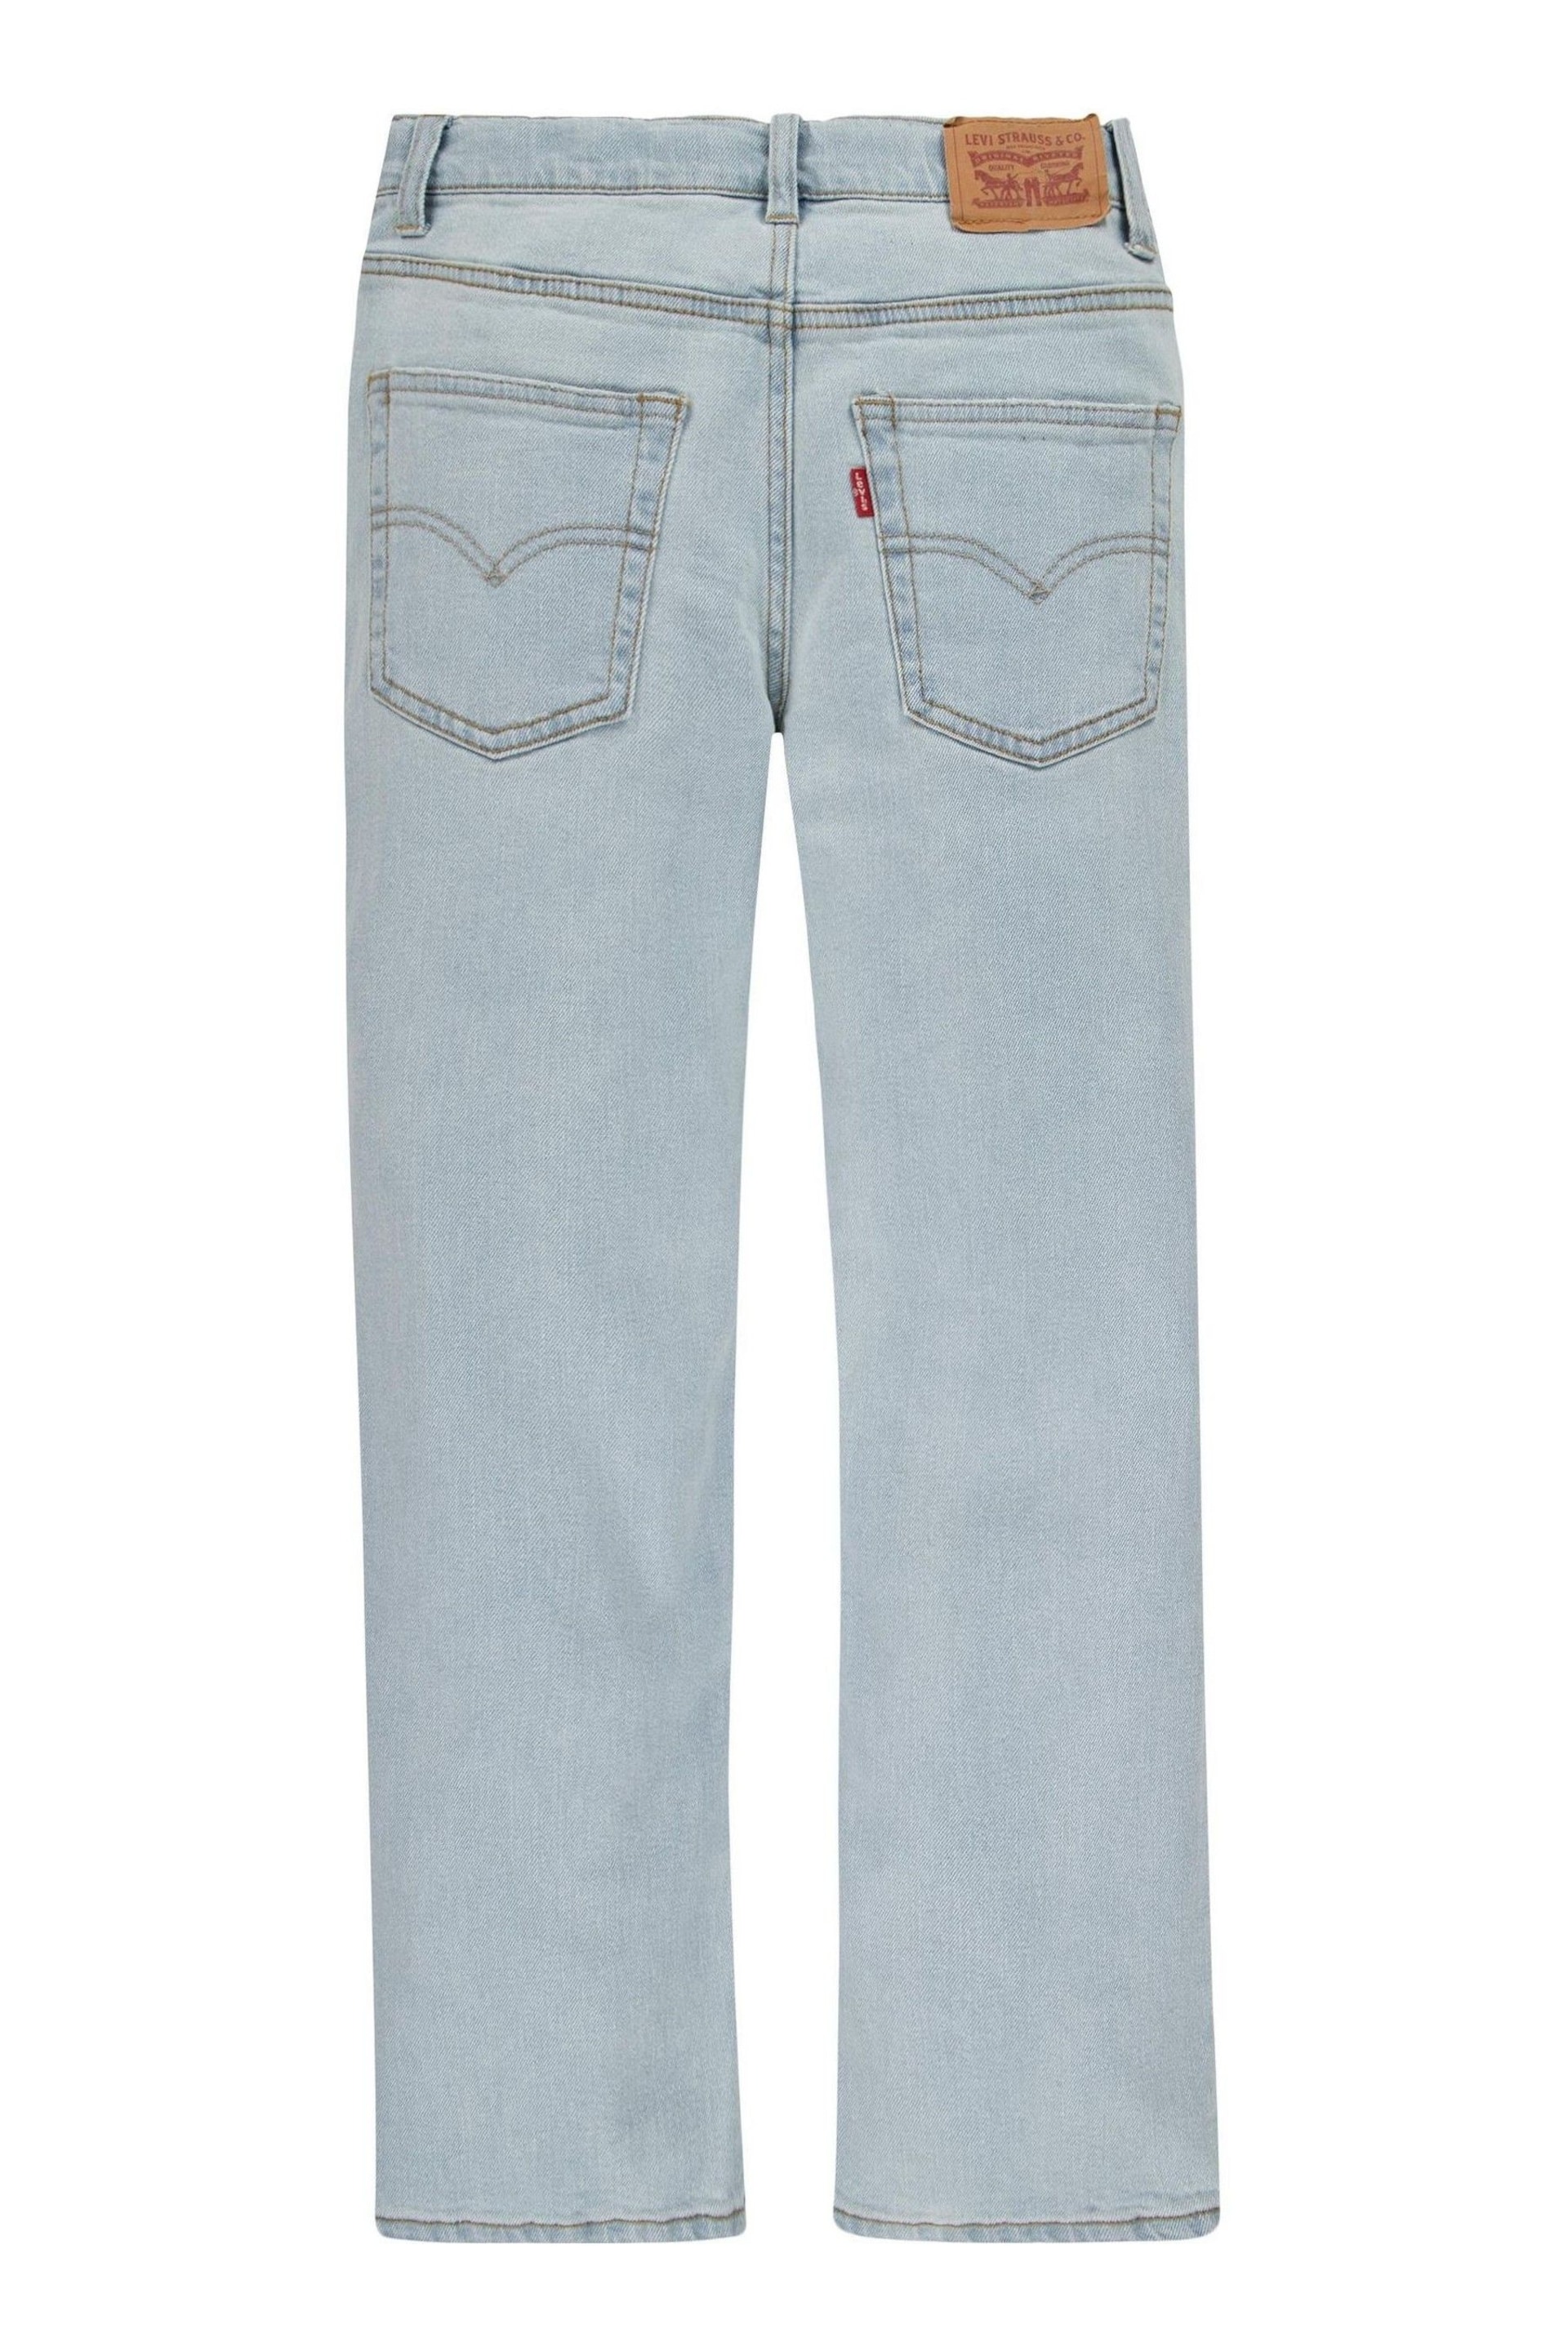 Levi's® Blue 551 Authentic Straight Jeans - Image 6 of 9